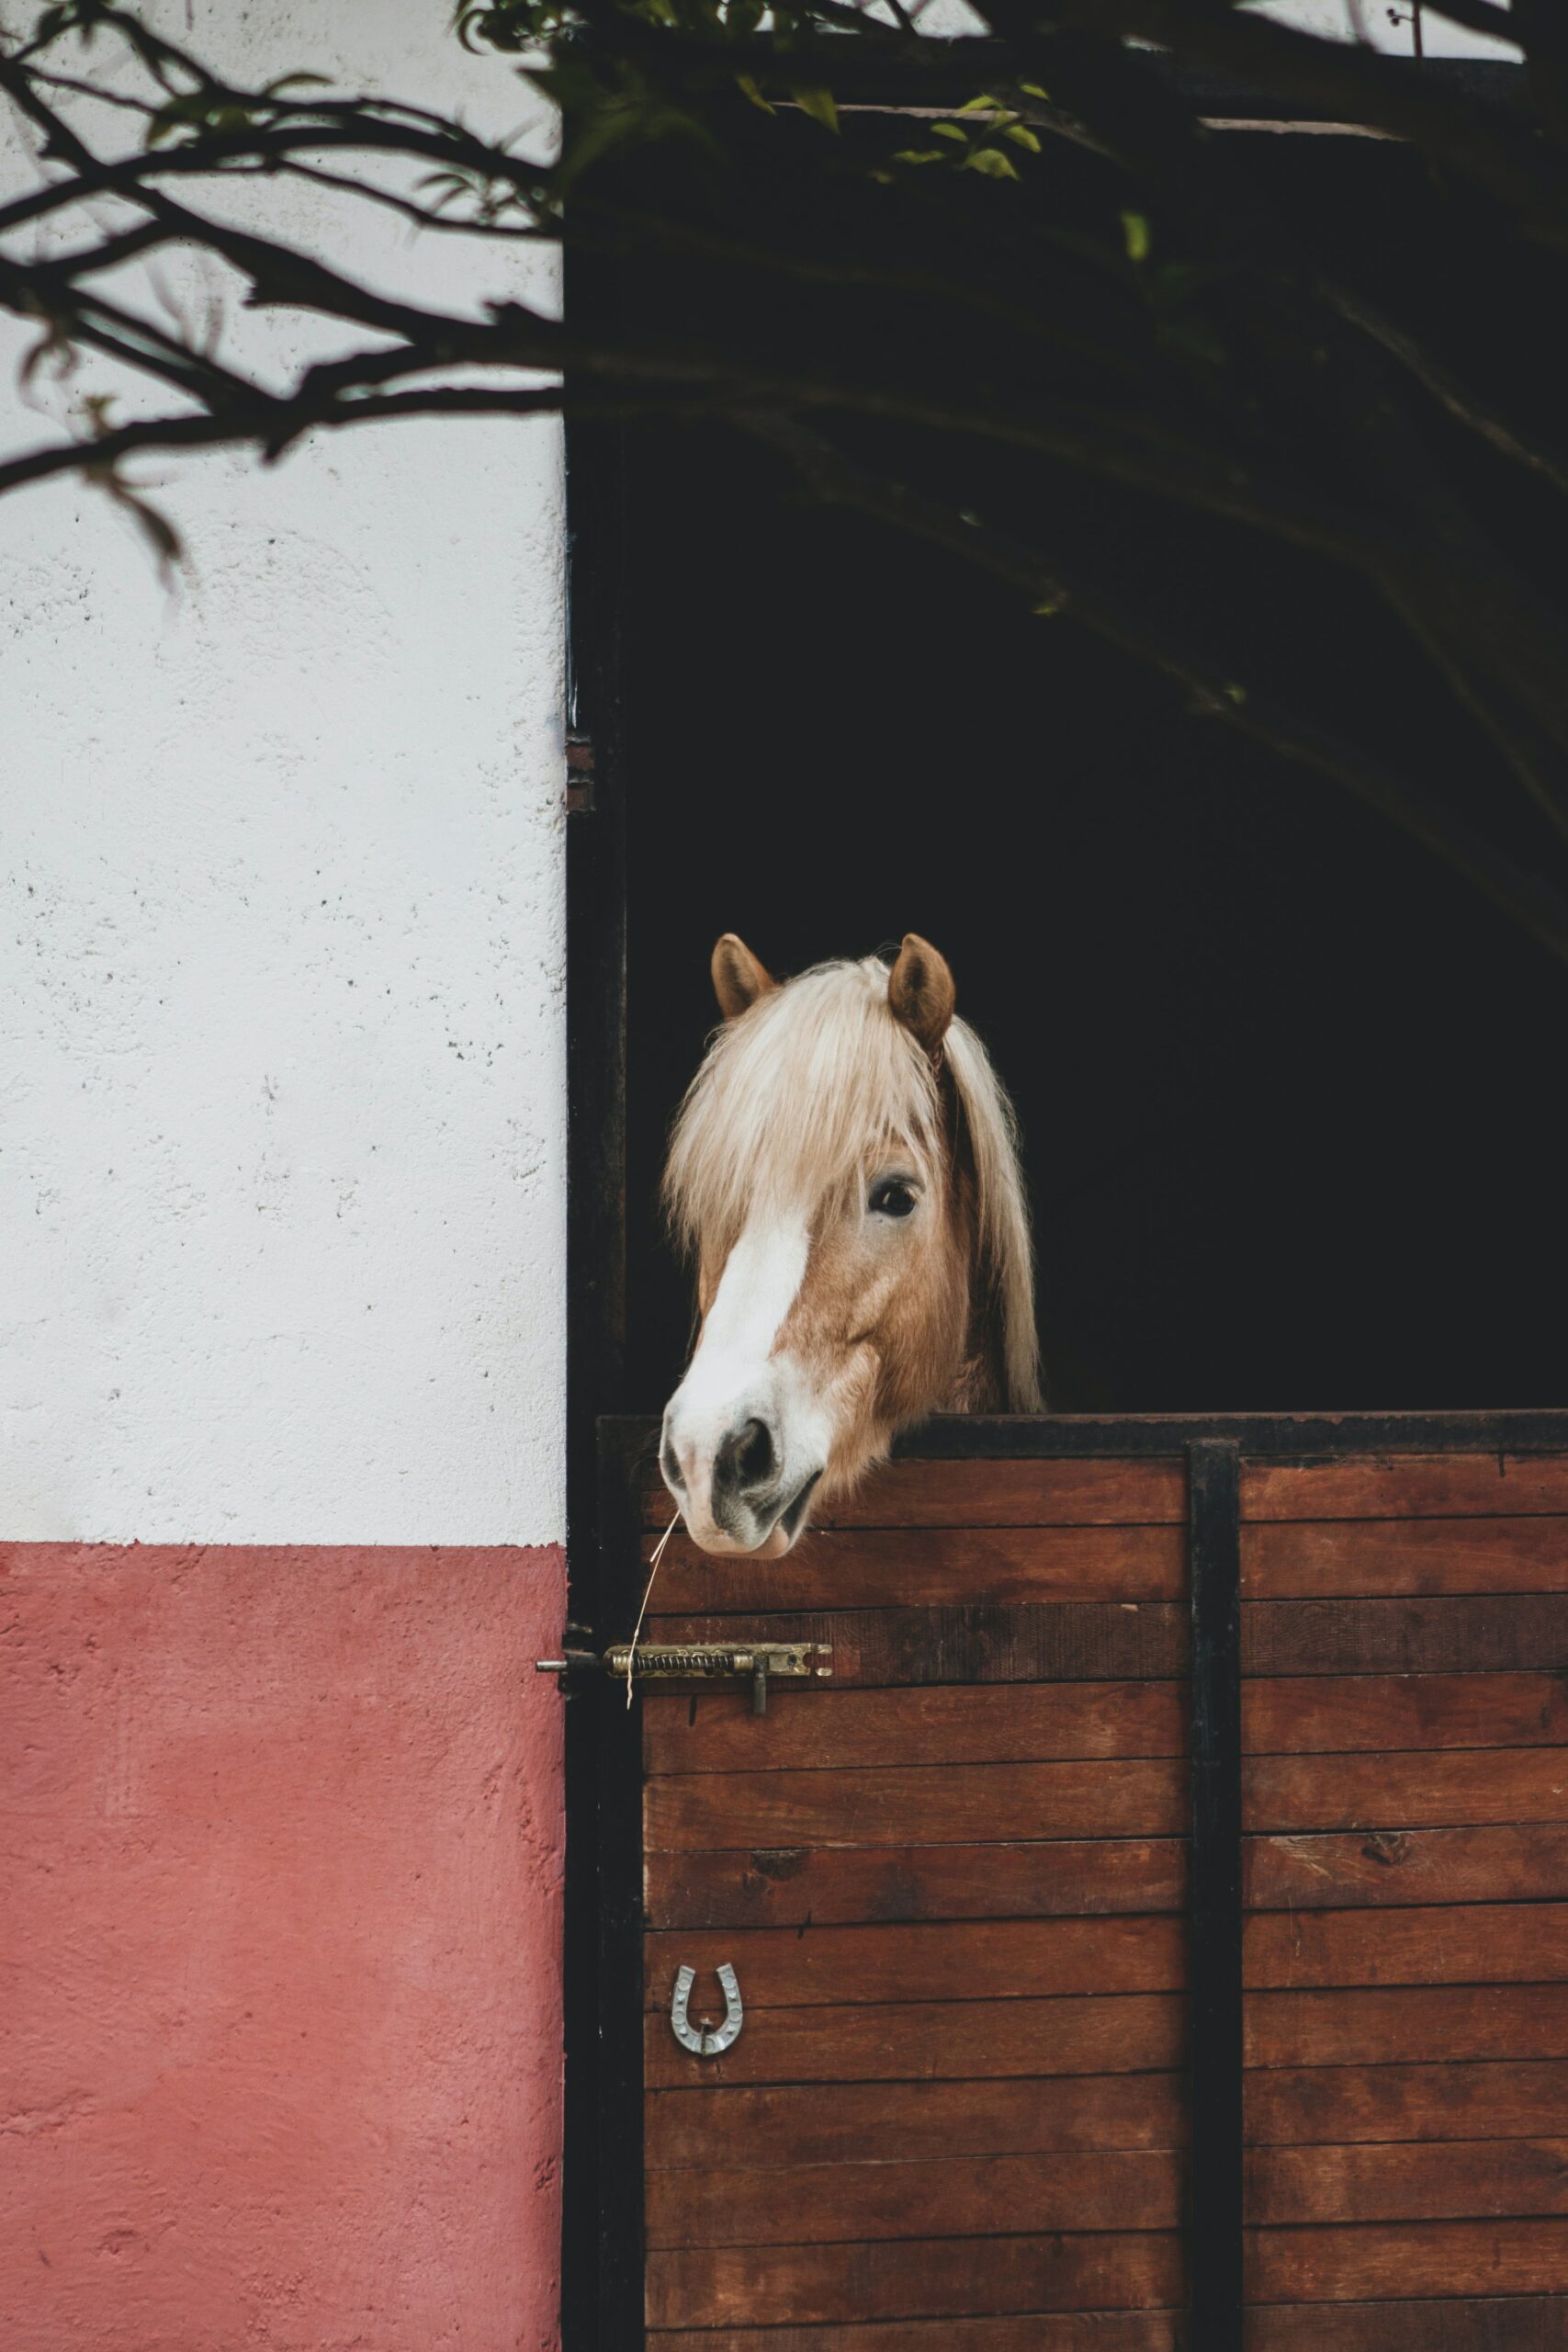 Are Horses OK with No Shelter?